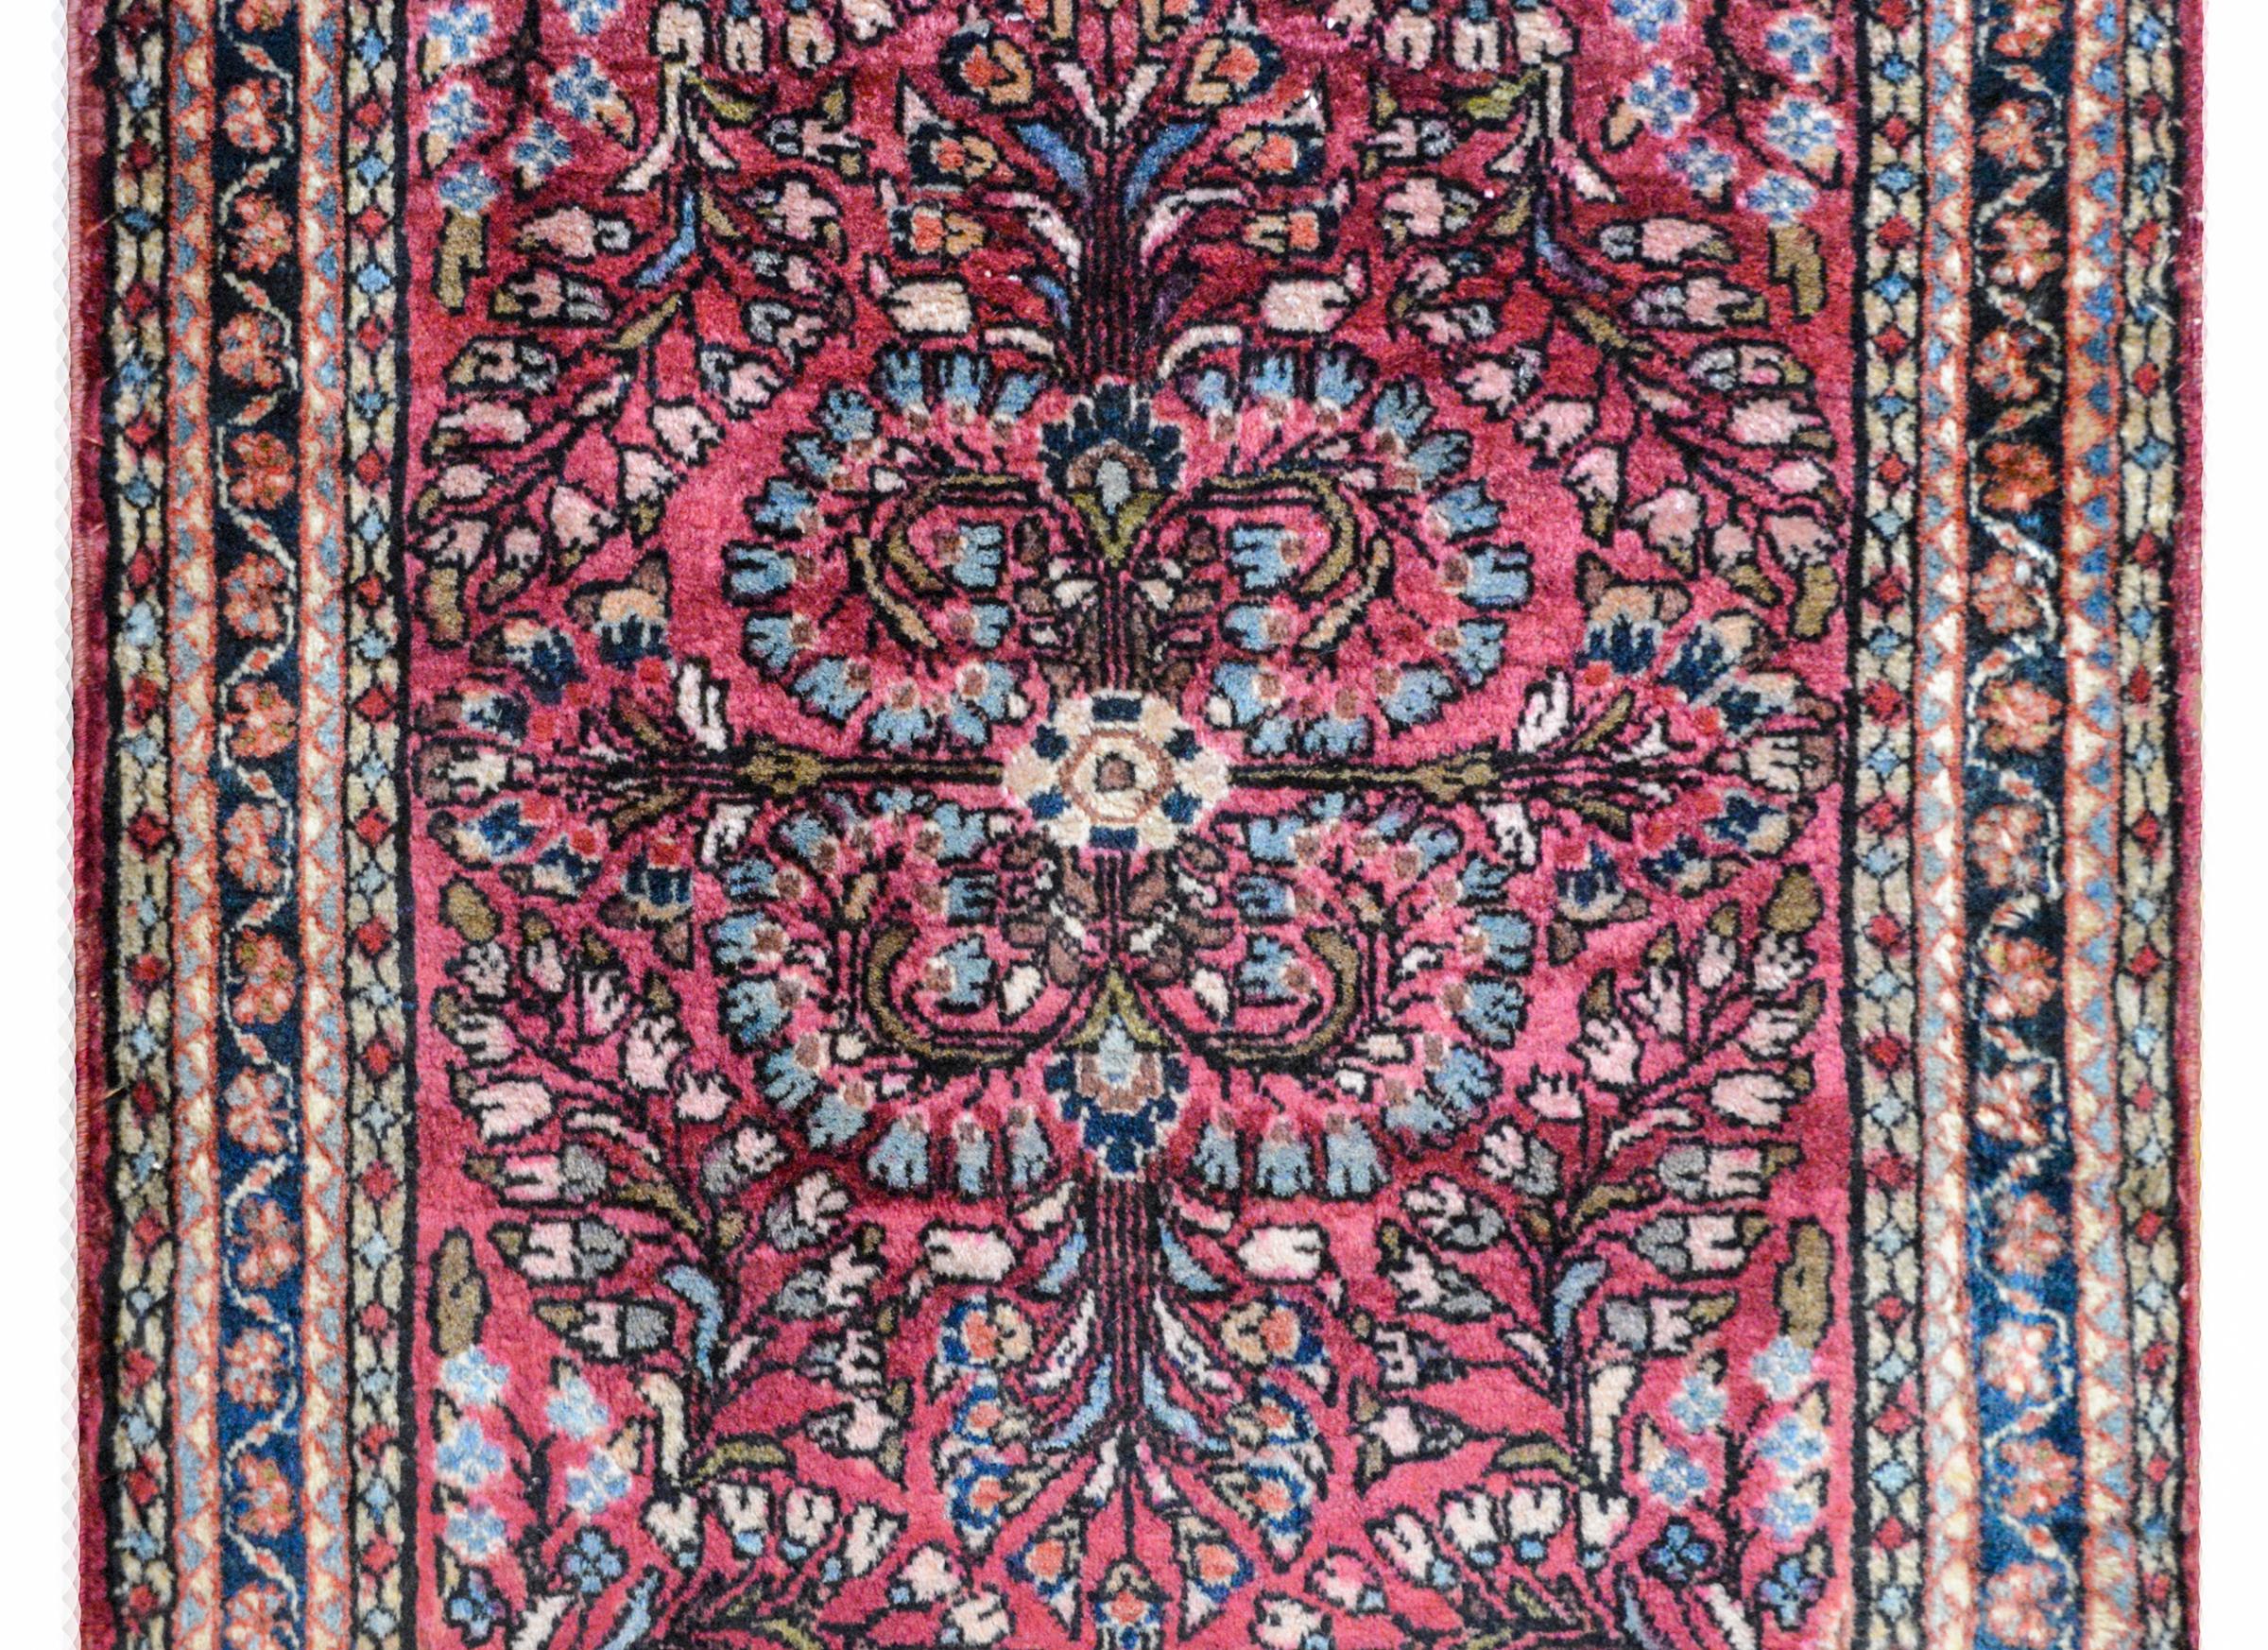 A wonderful early 20th century petite Persian Sarouk rug with a large-scale mirrored floral pattern woven in light and dark indigo, cream, pink, and green wool, against a cranberry colored ground. The border is sweet with a central petite floral